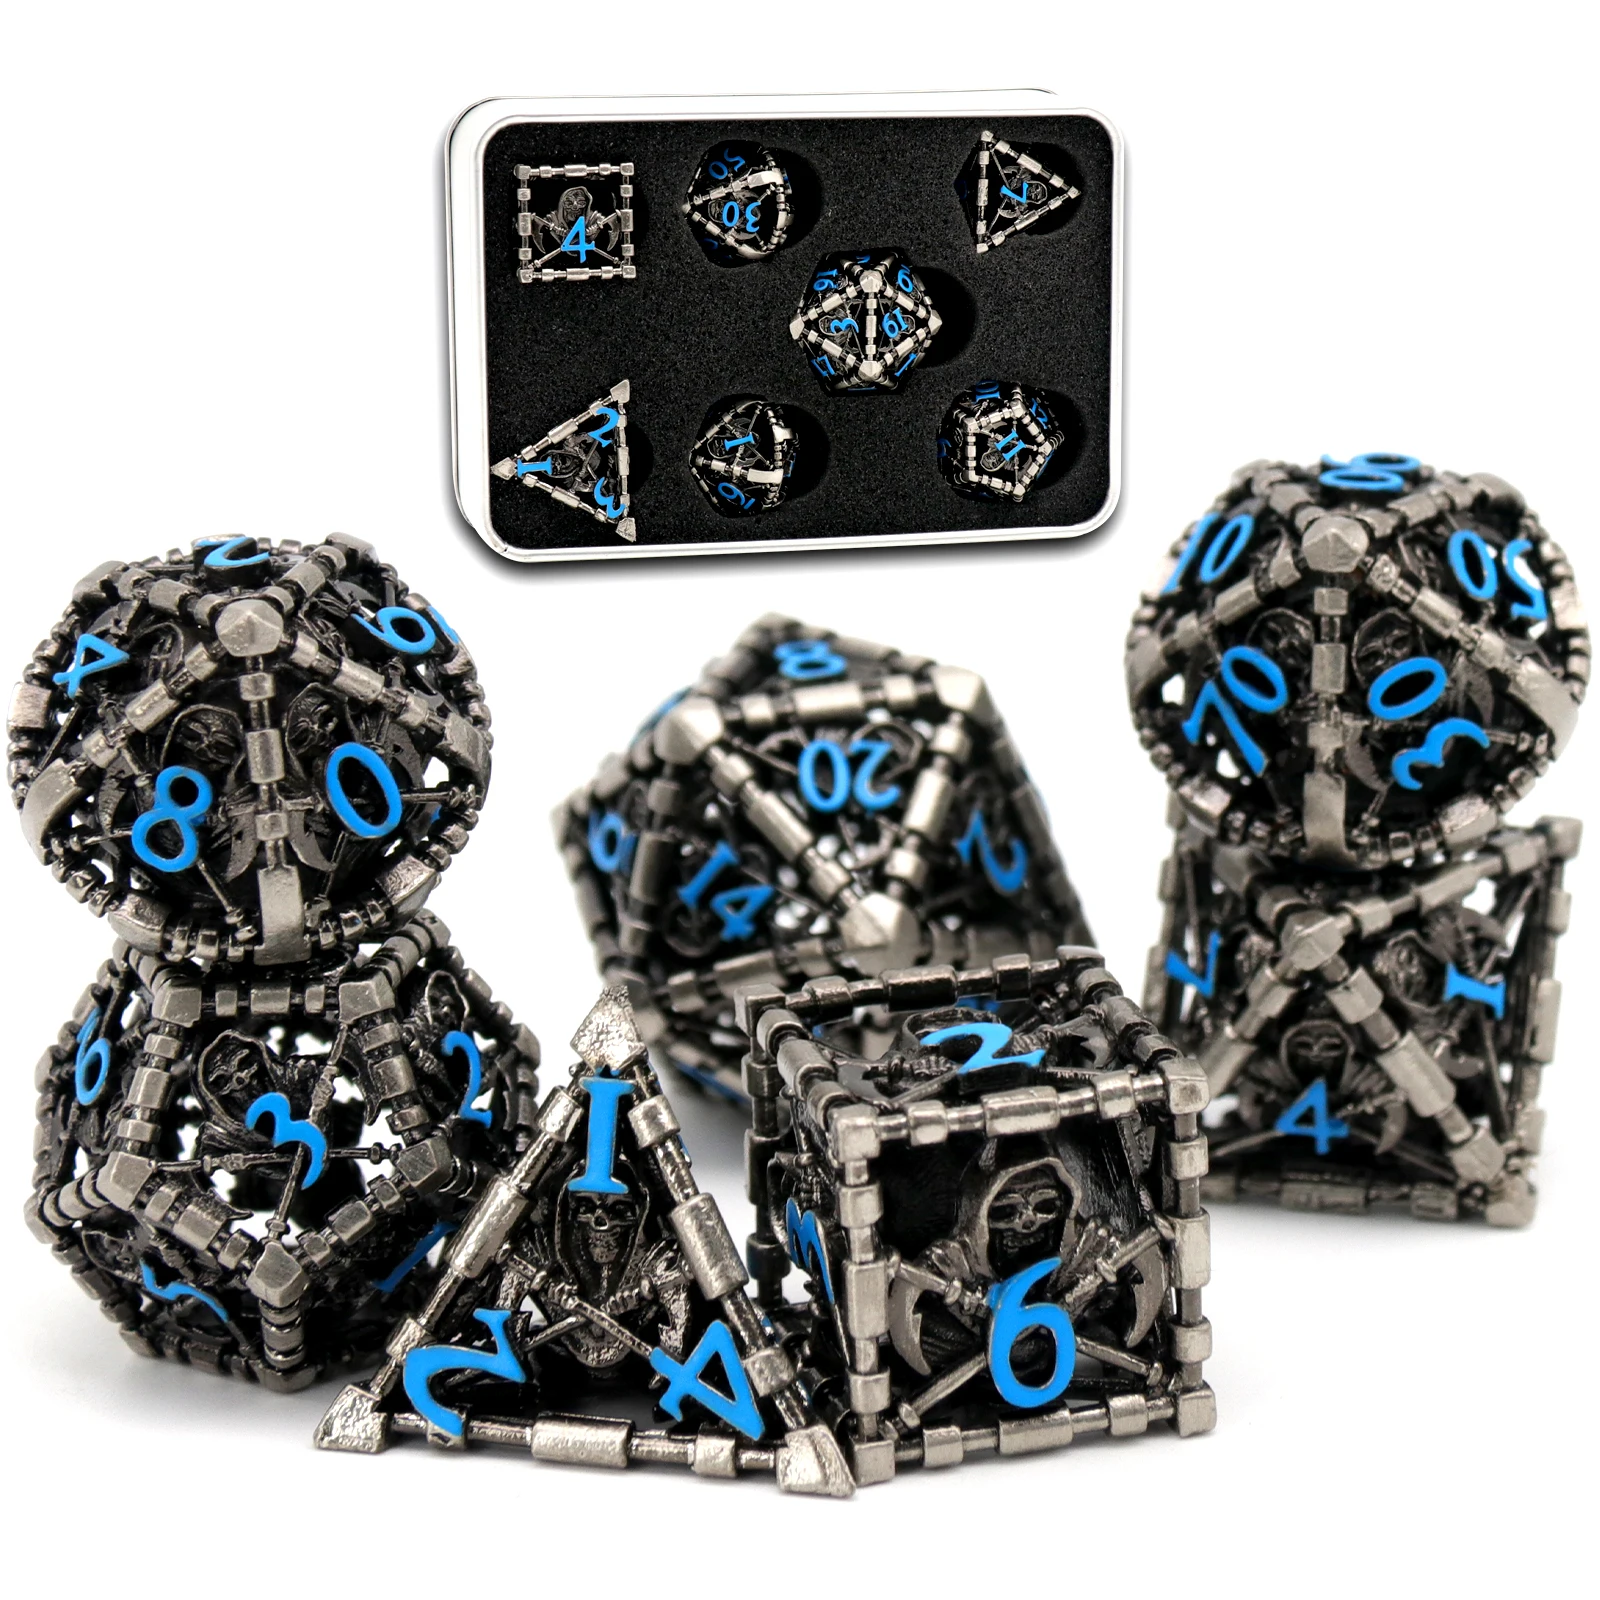 DND Dice Set Roleplaying Game, Polyhedral Dice Set D&D Dice Set Reaper Metal Hollow Dice for Board Game(Antique Silver Blue) dnd dice set roleplaying game polyhedral dice set d